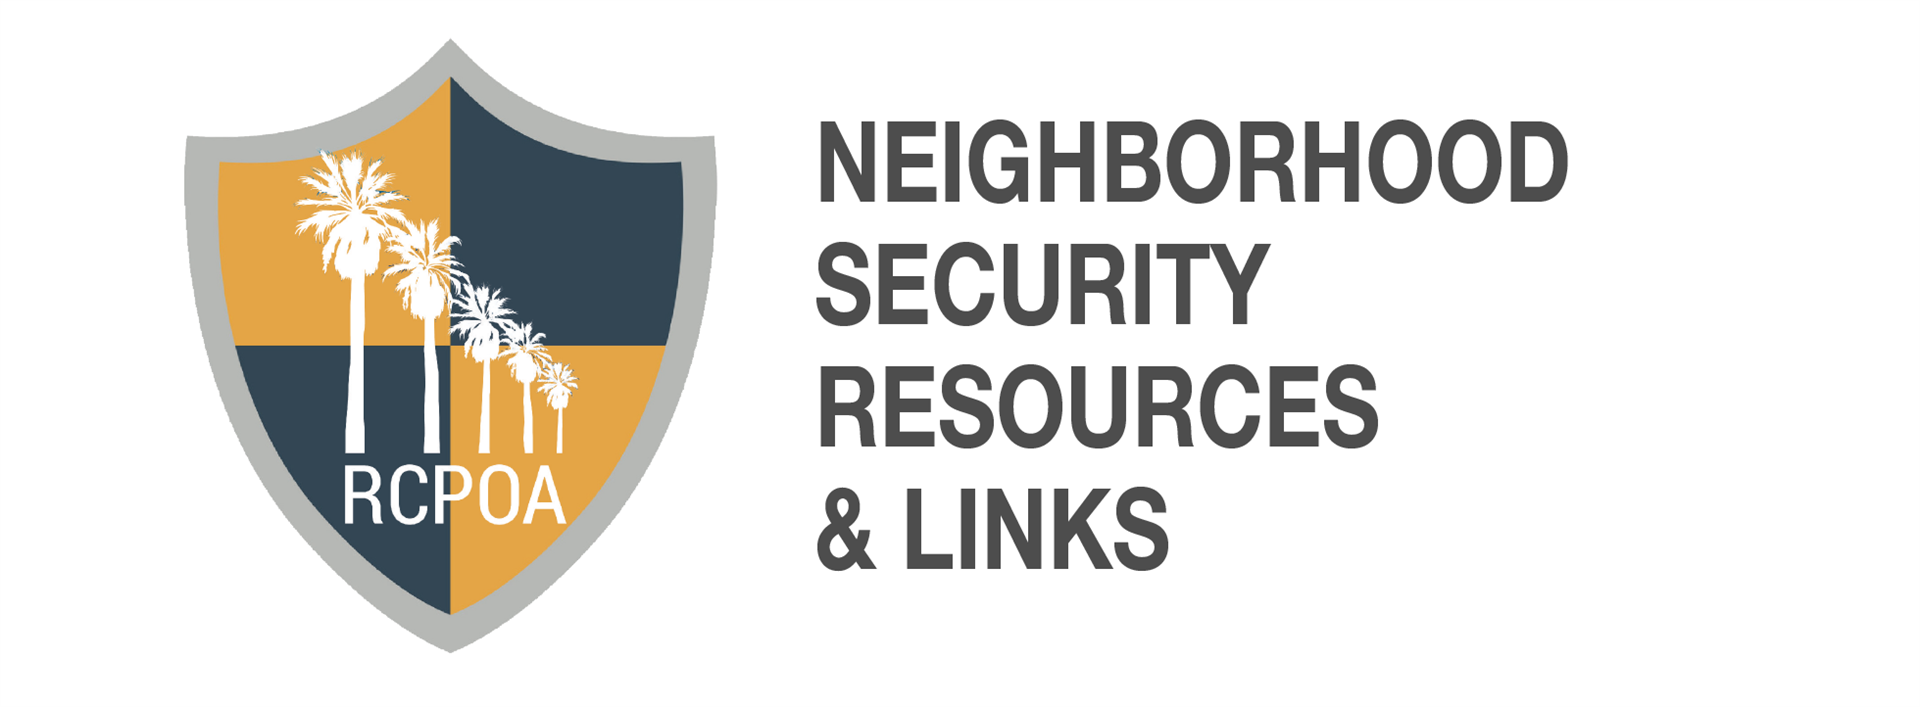 Neighborhood Security Resources and Links